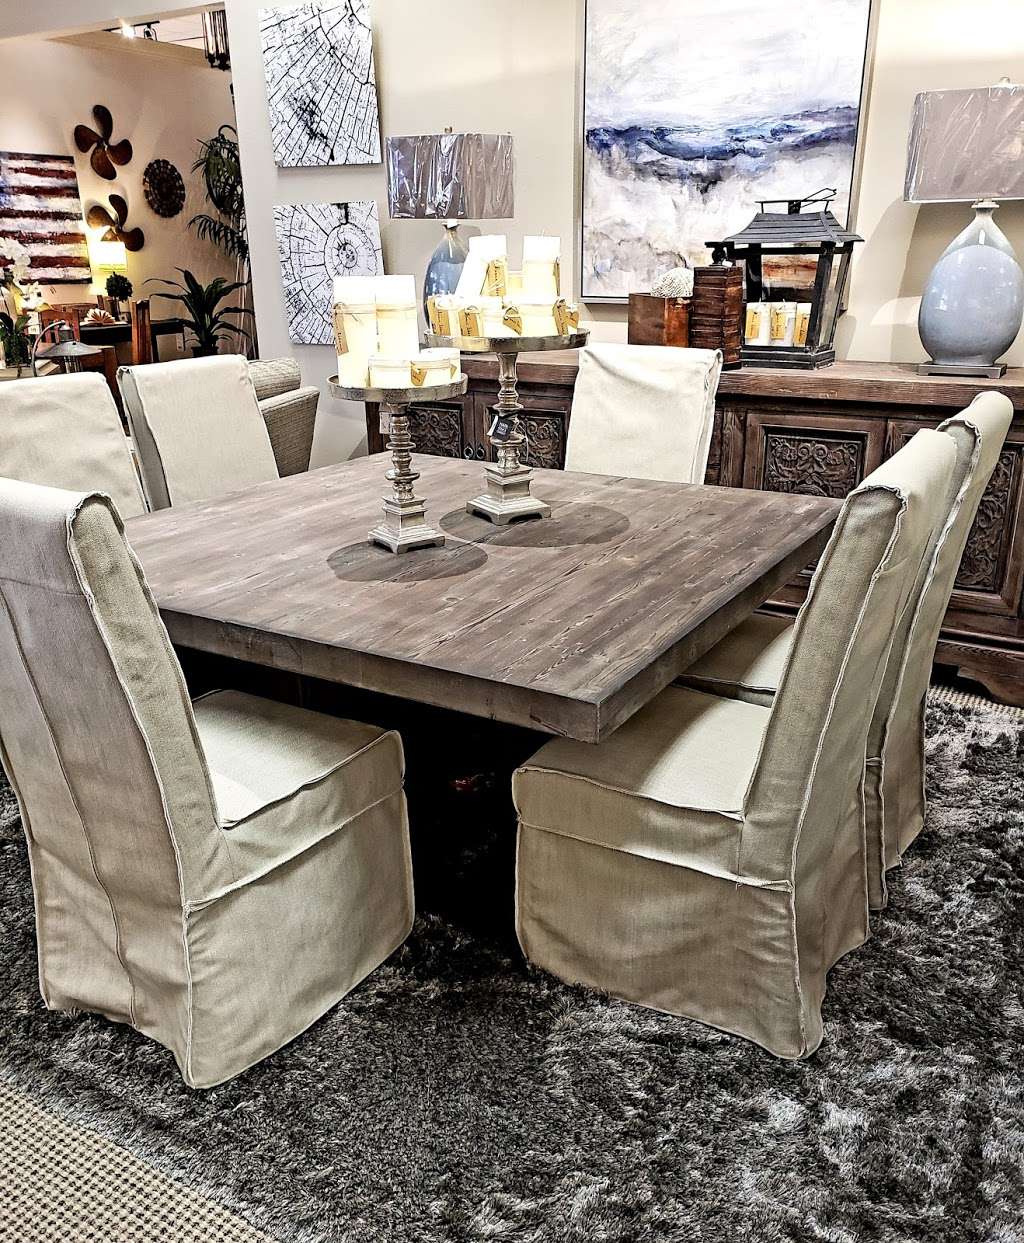 Right At Home Furniture | 520 West State Road 436 #1150, Altamonte Springs, FL 32714 | Phone: (407) 339-4663